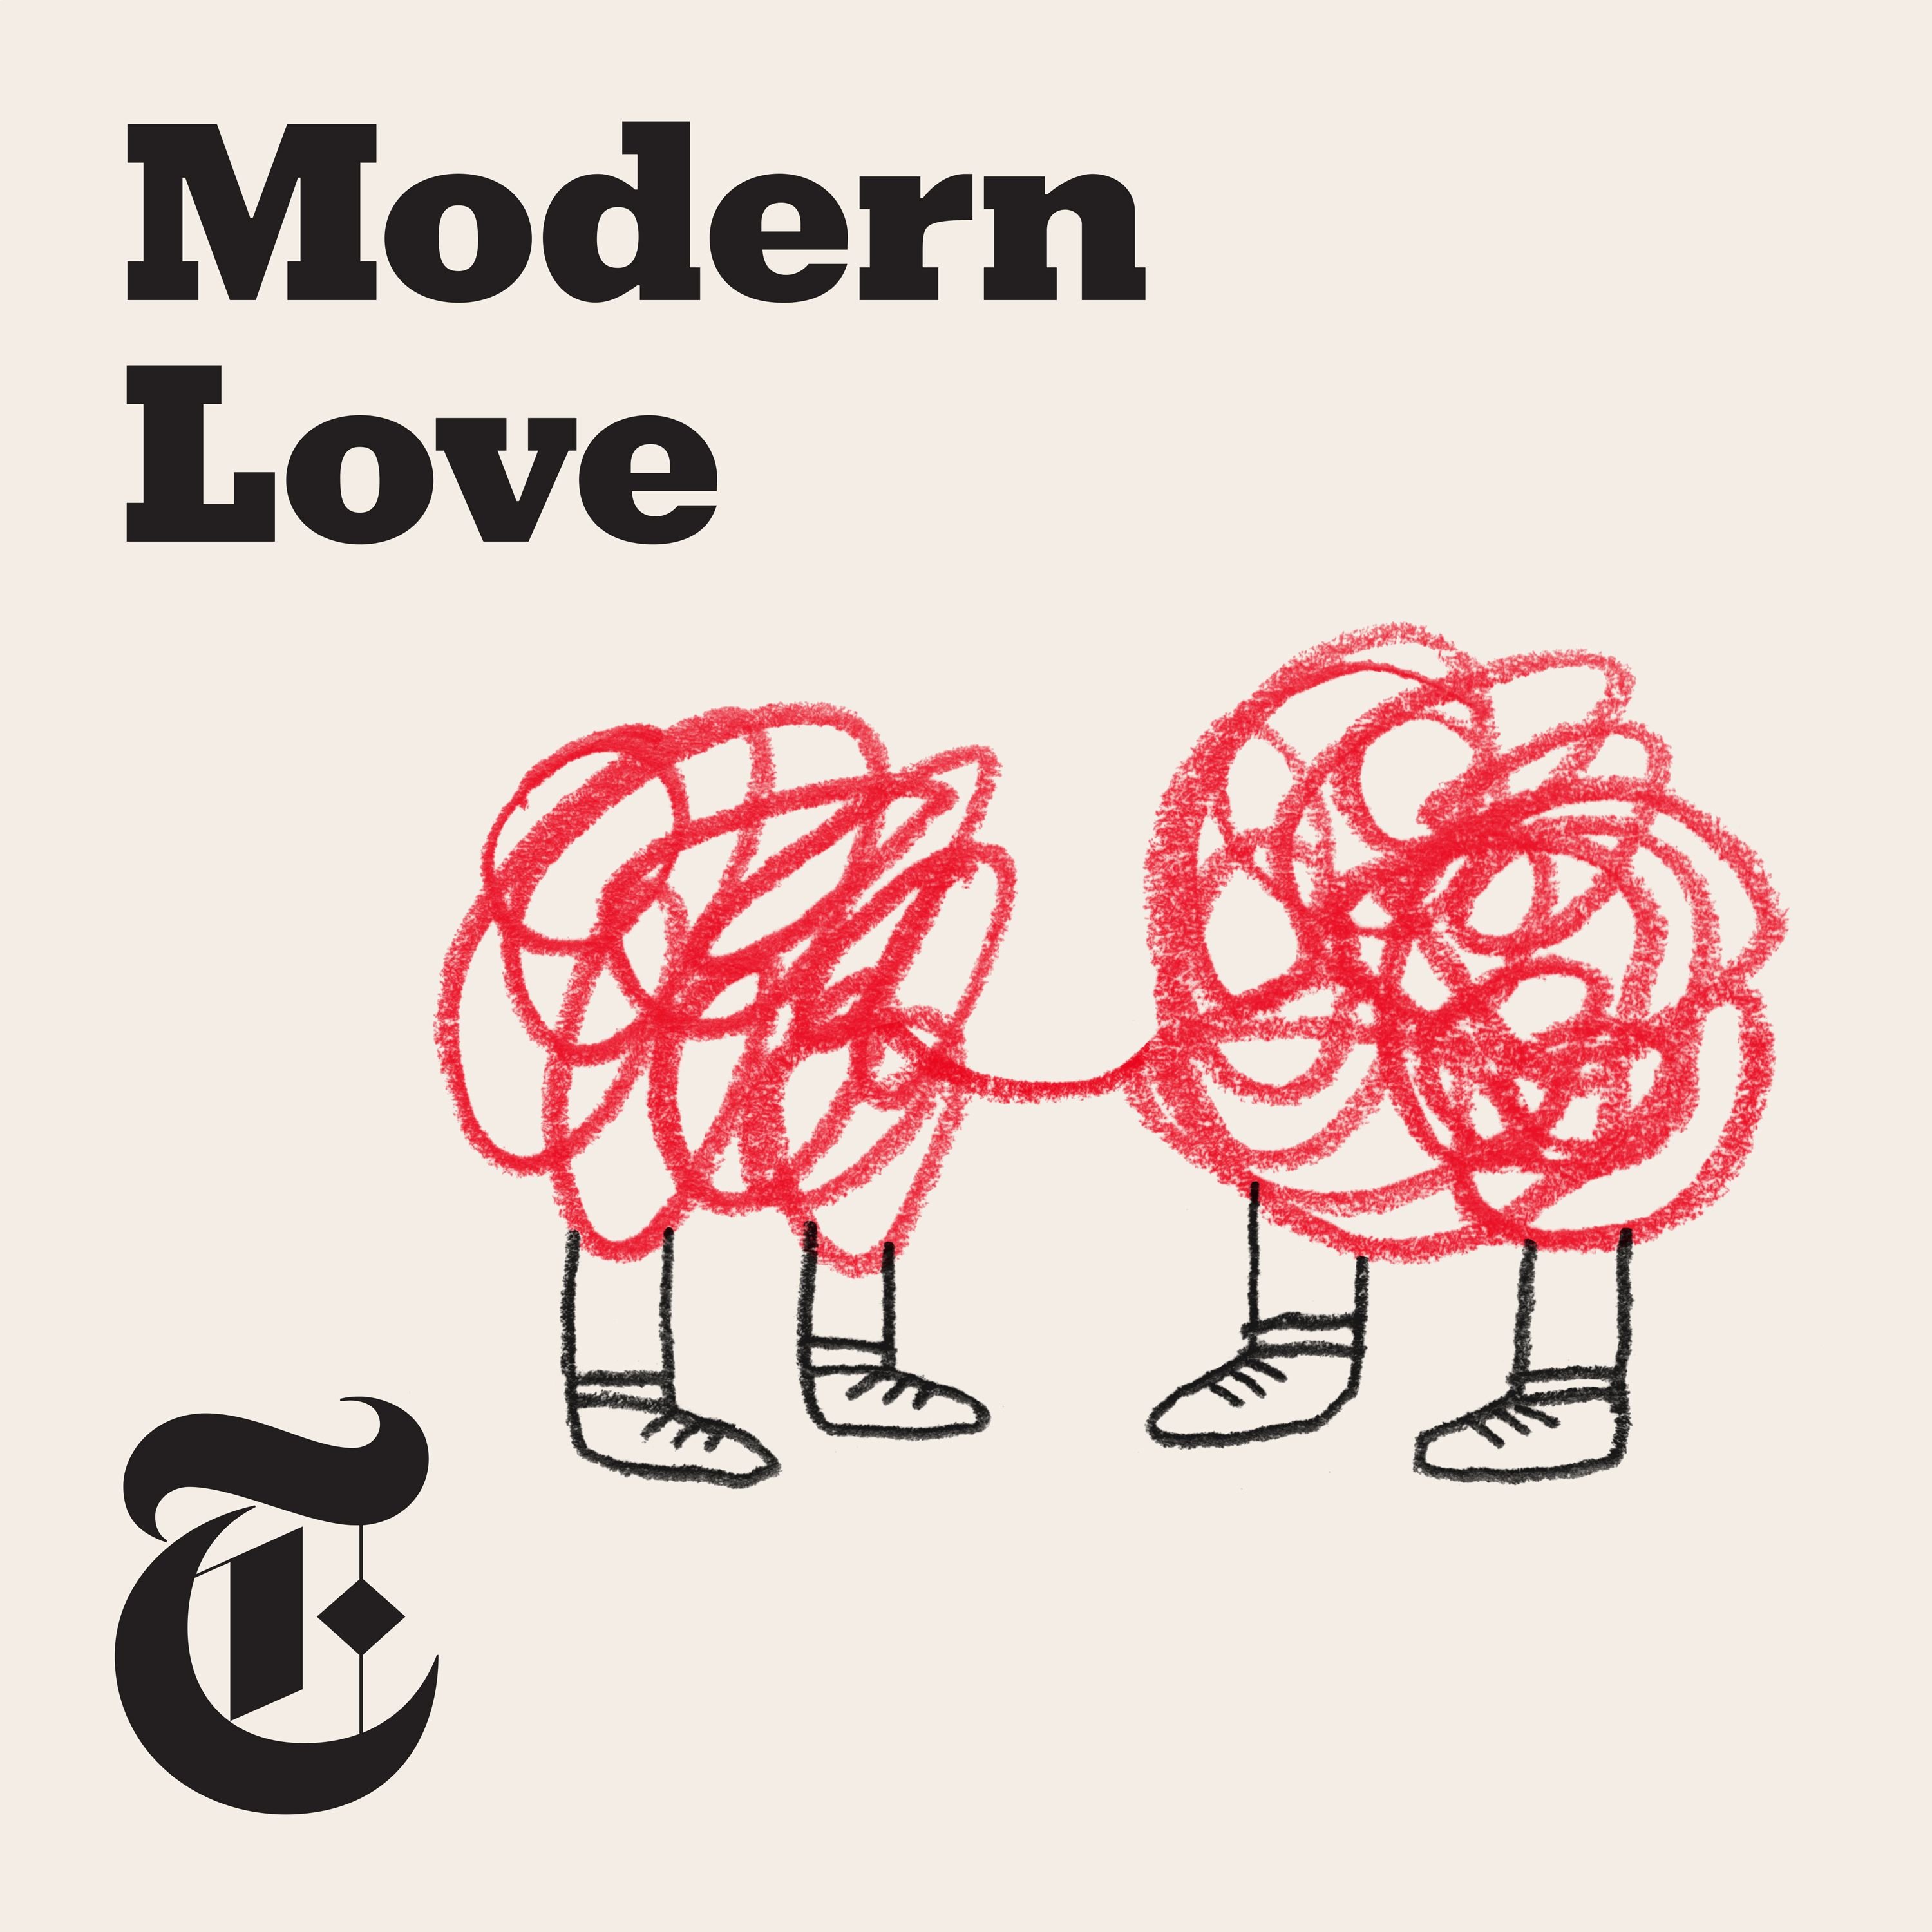 Advertise on “The Modern Love Podcast”